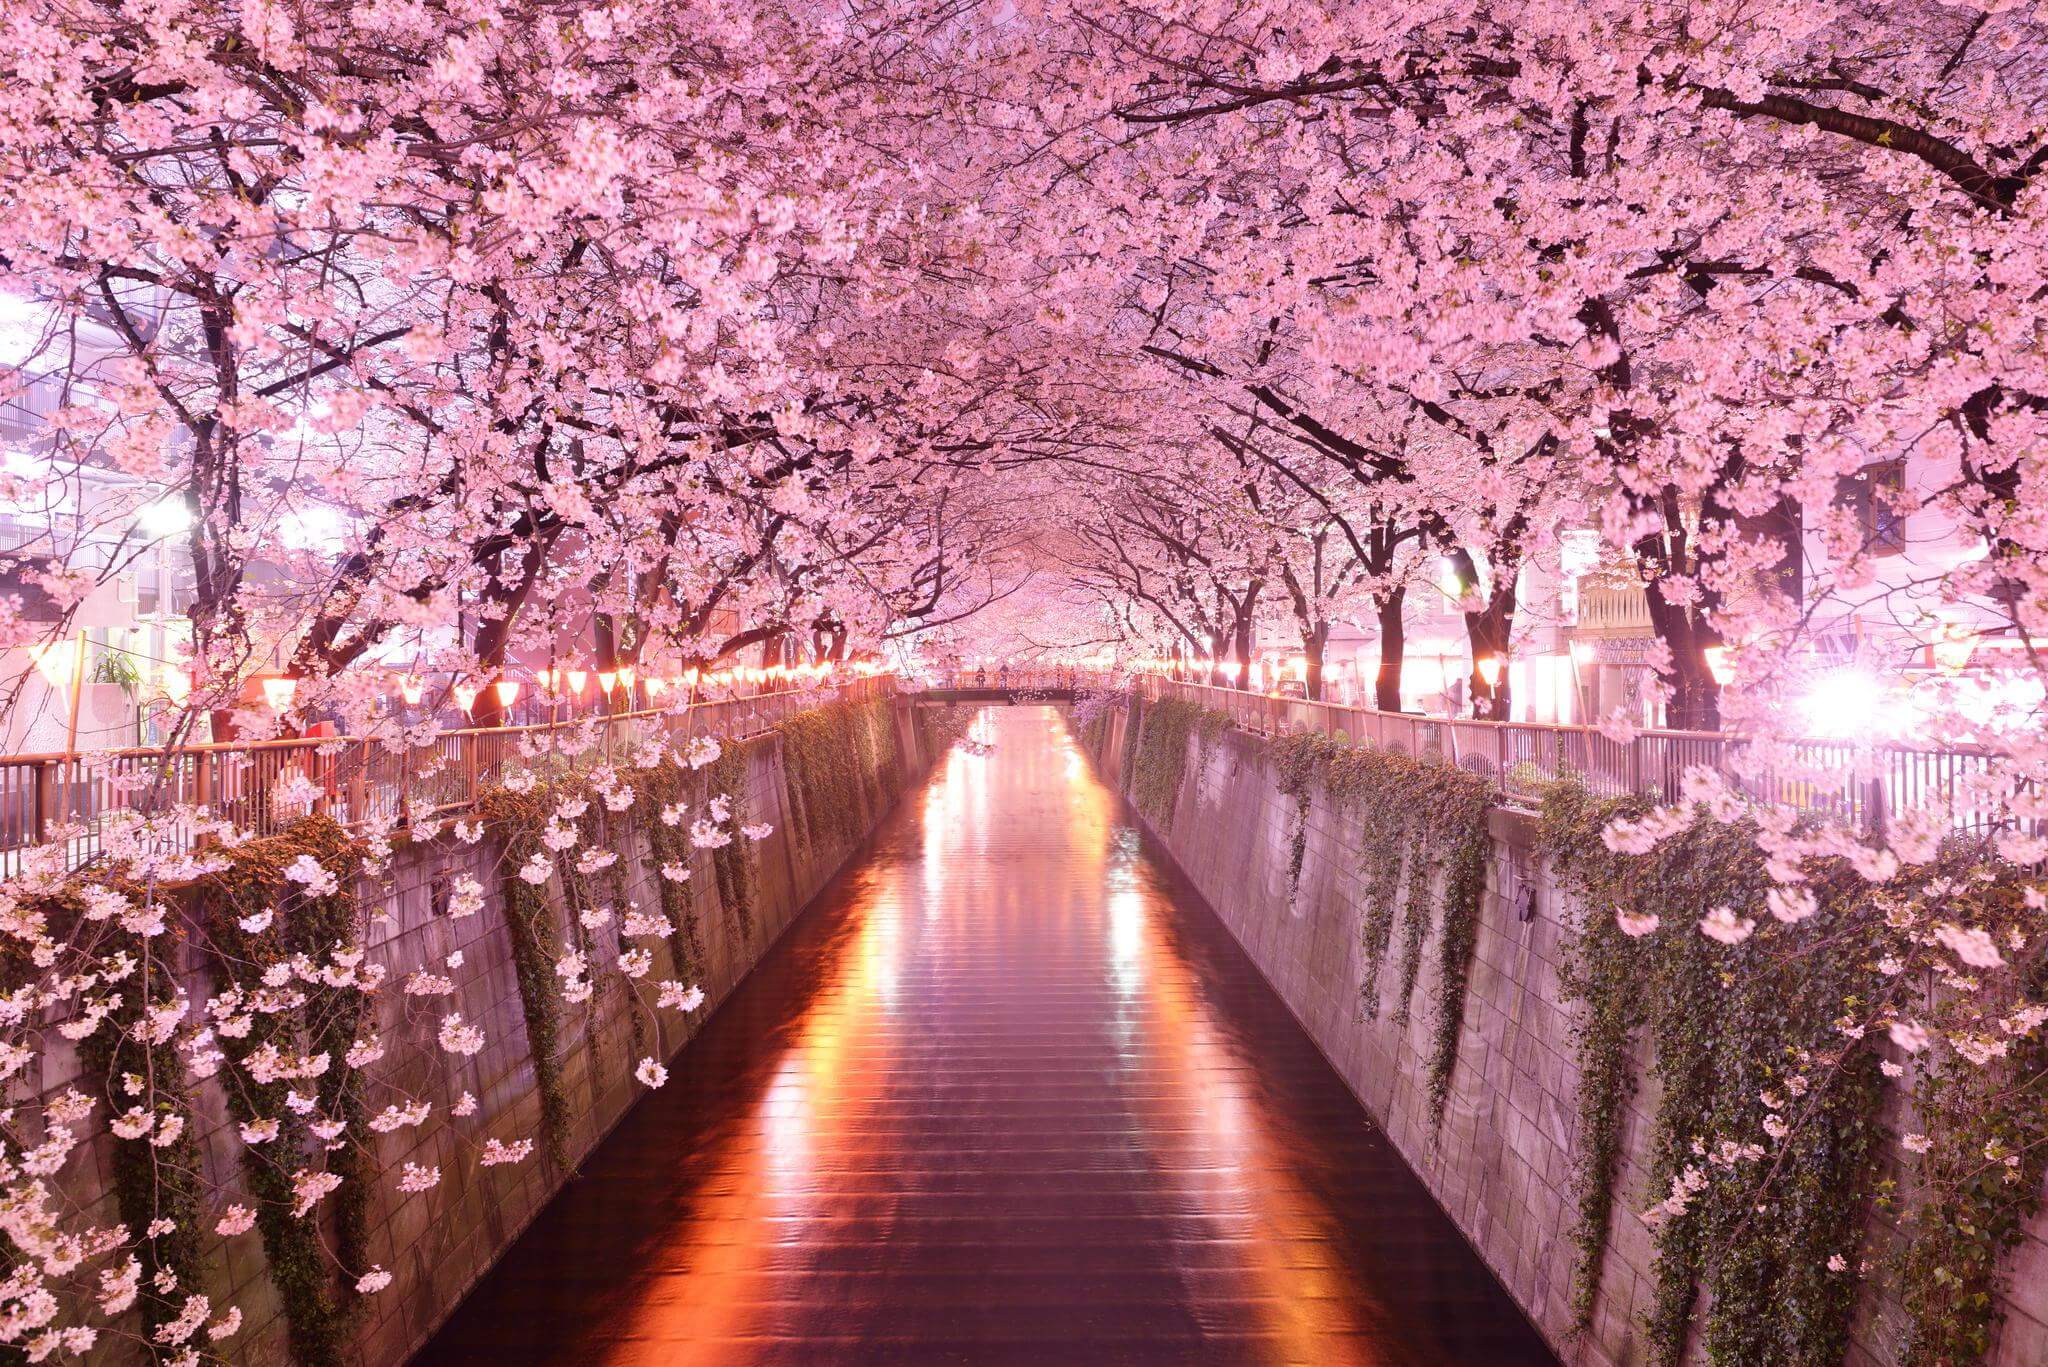 General 2048x1367 flowers nature cherry blossom Japan